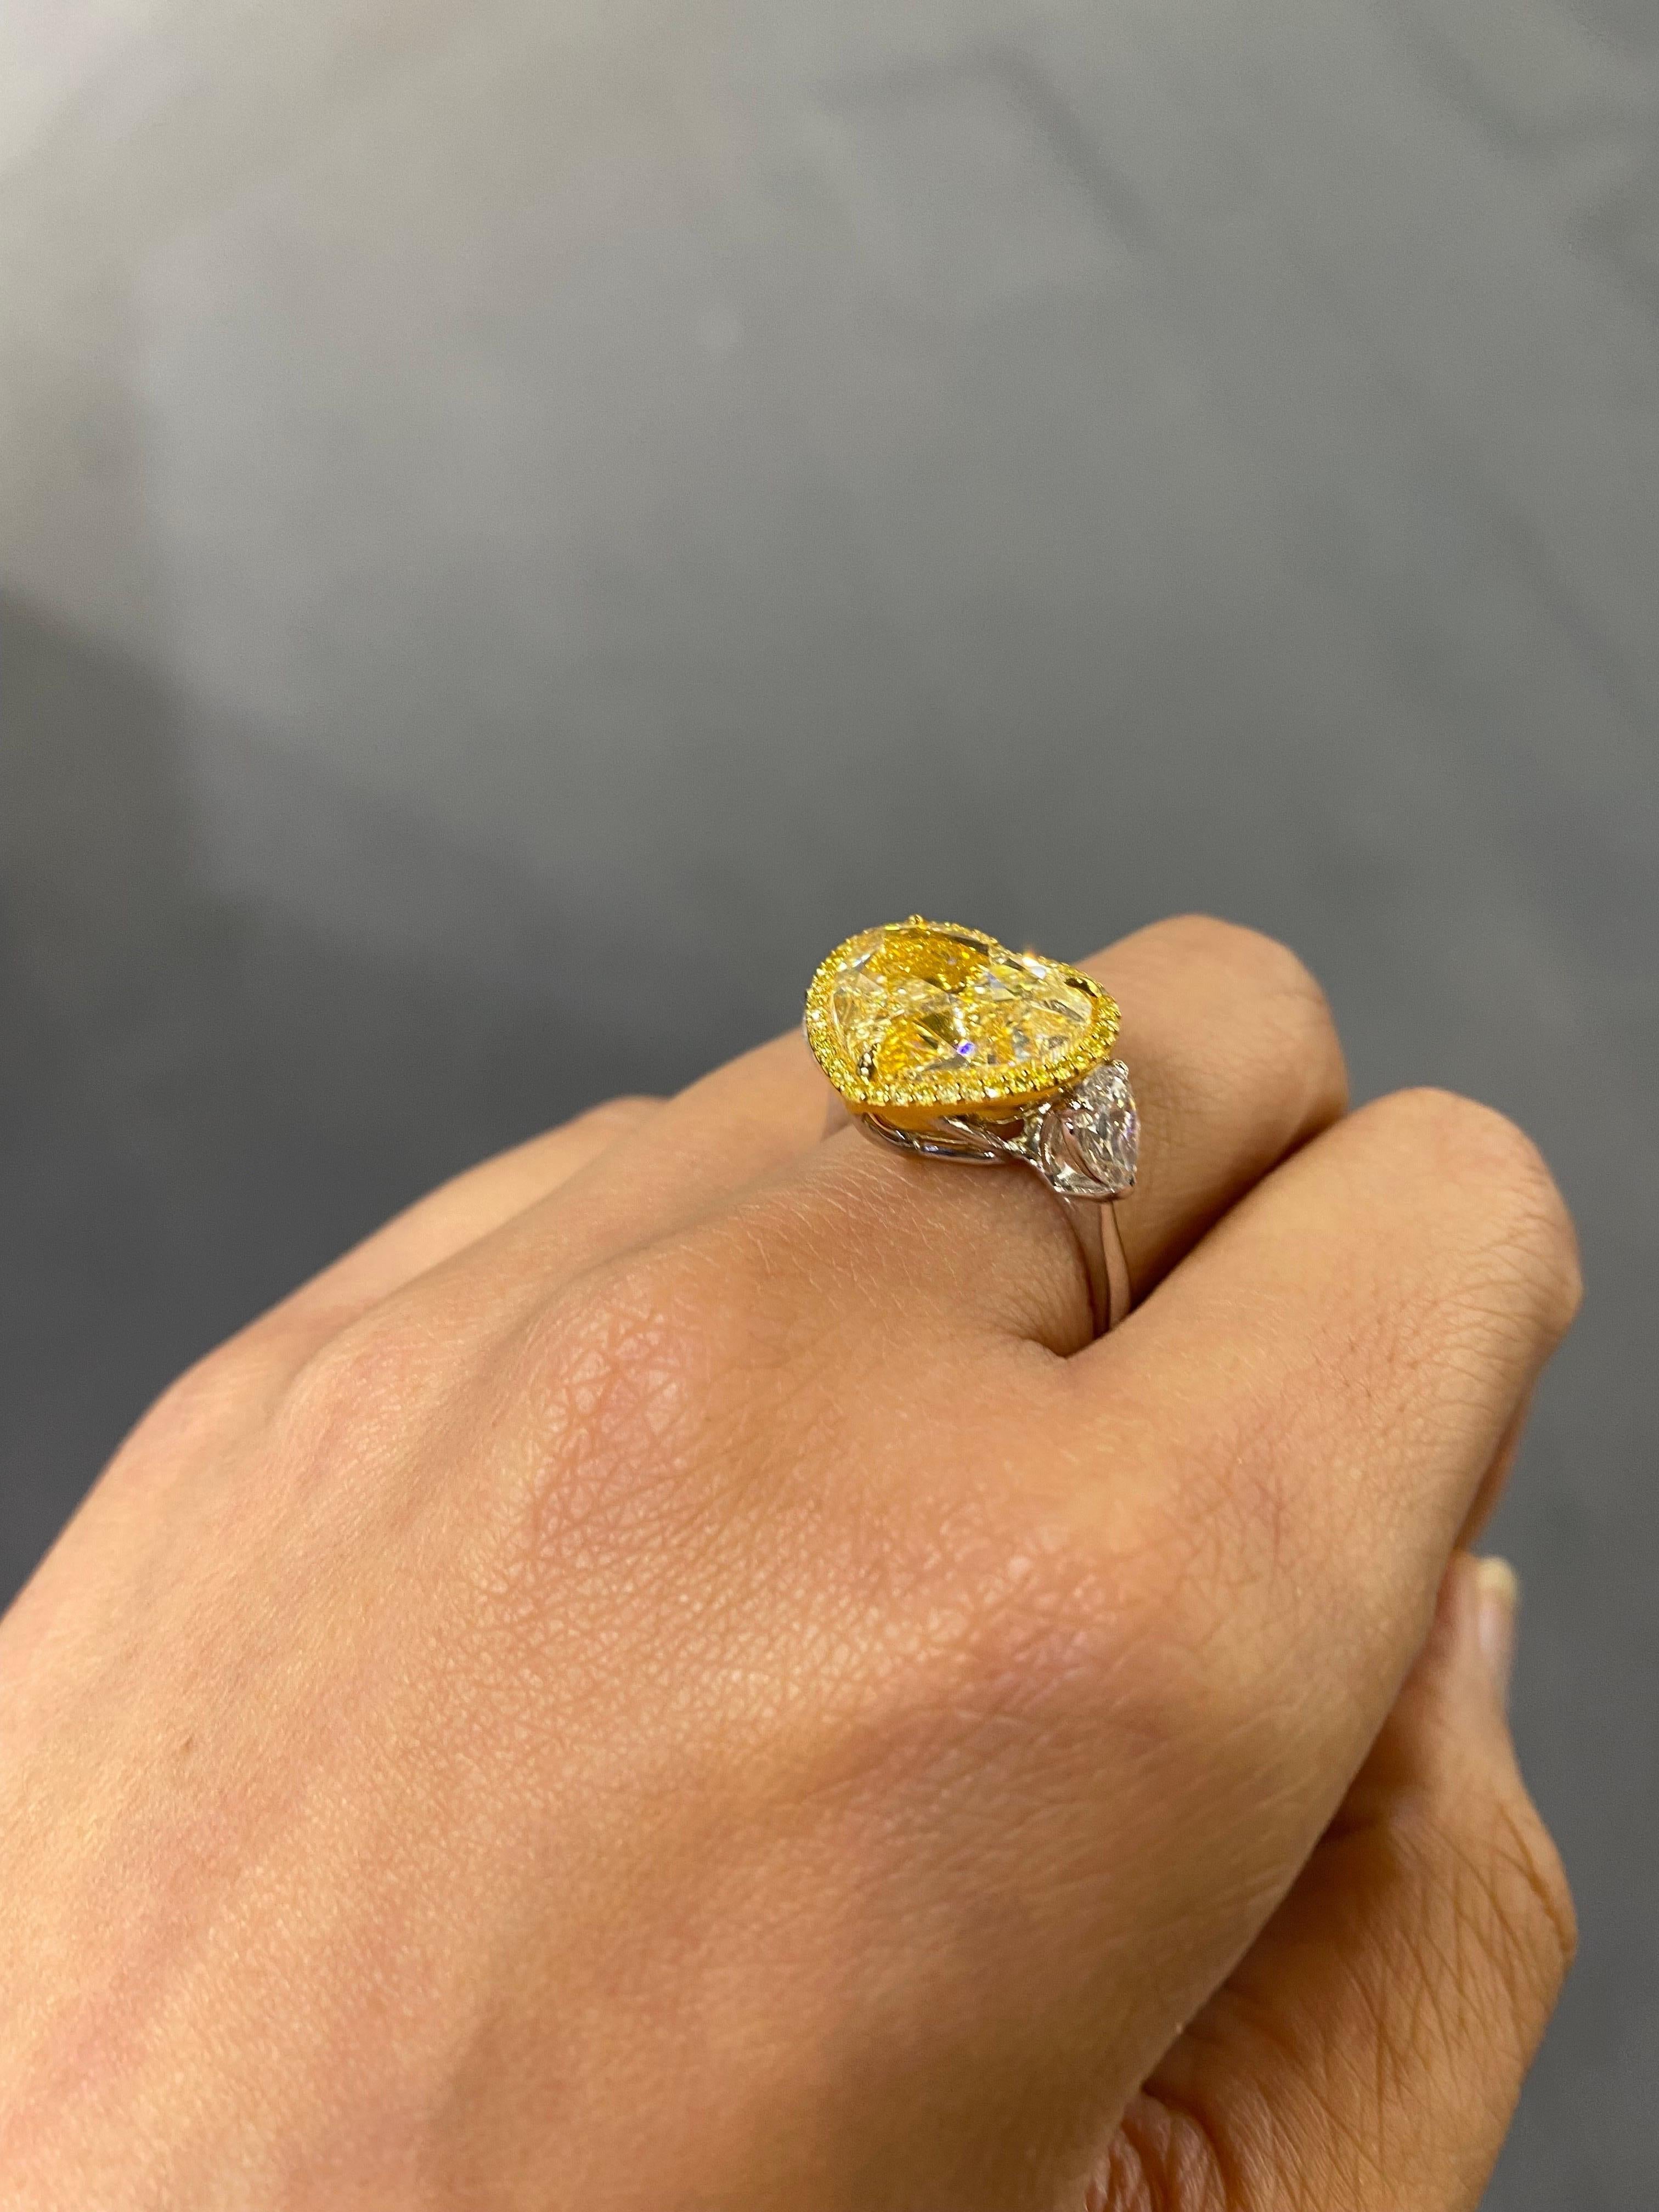 A certified, stunning heart-shaped 9 carat natural YZ Yellow Diamond ring, SI1 quality, with 2 pear shape white diamonds on the side. The ring is currently sized at US 7, can be resized.
Please feel free to message us for more information. 